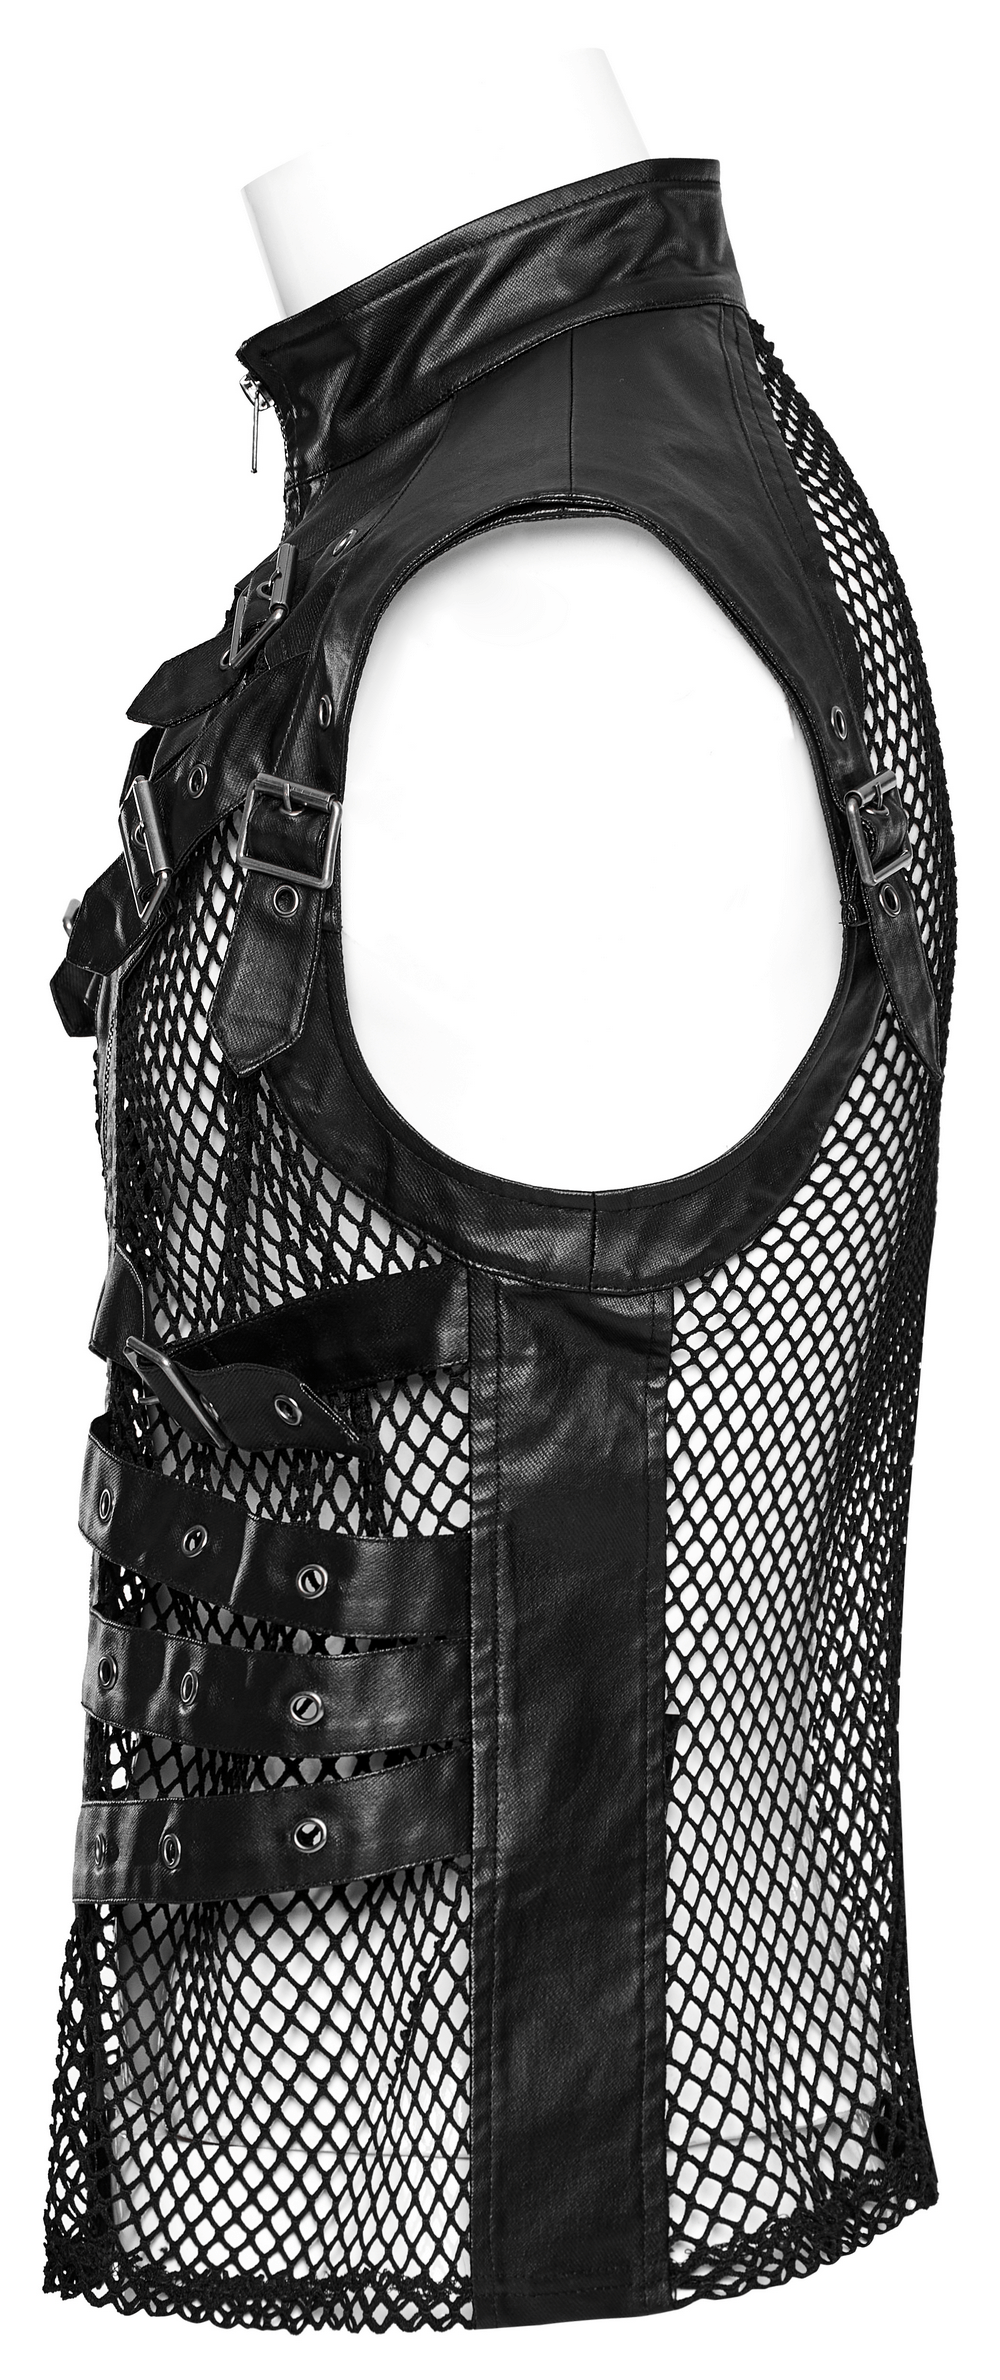 Edgy Zippered Black Punk Leather Vest With Mesh Back